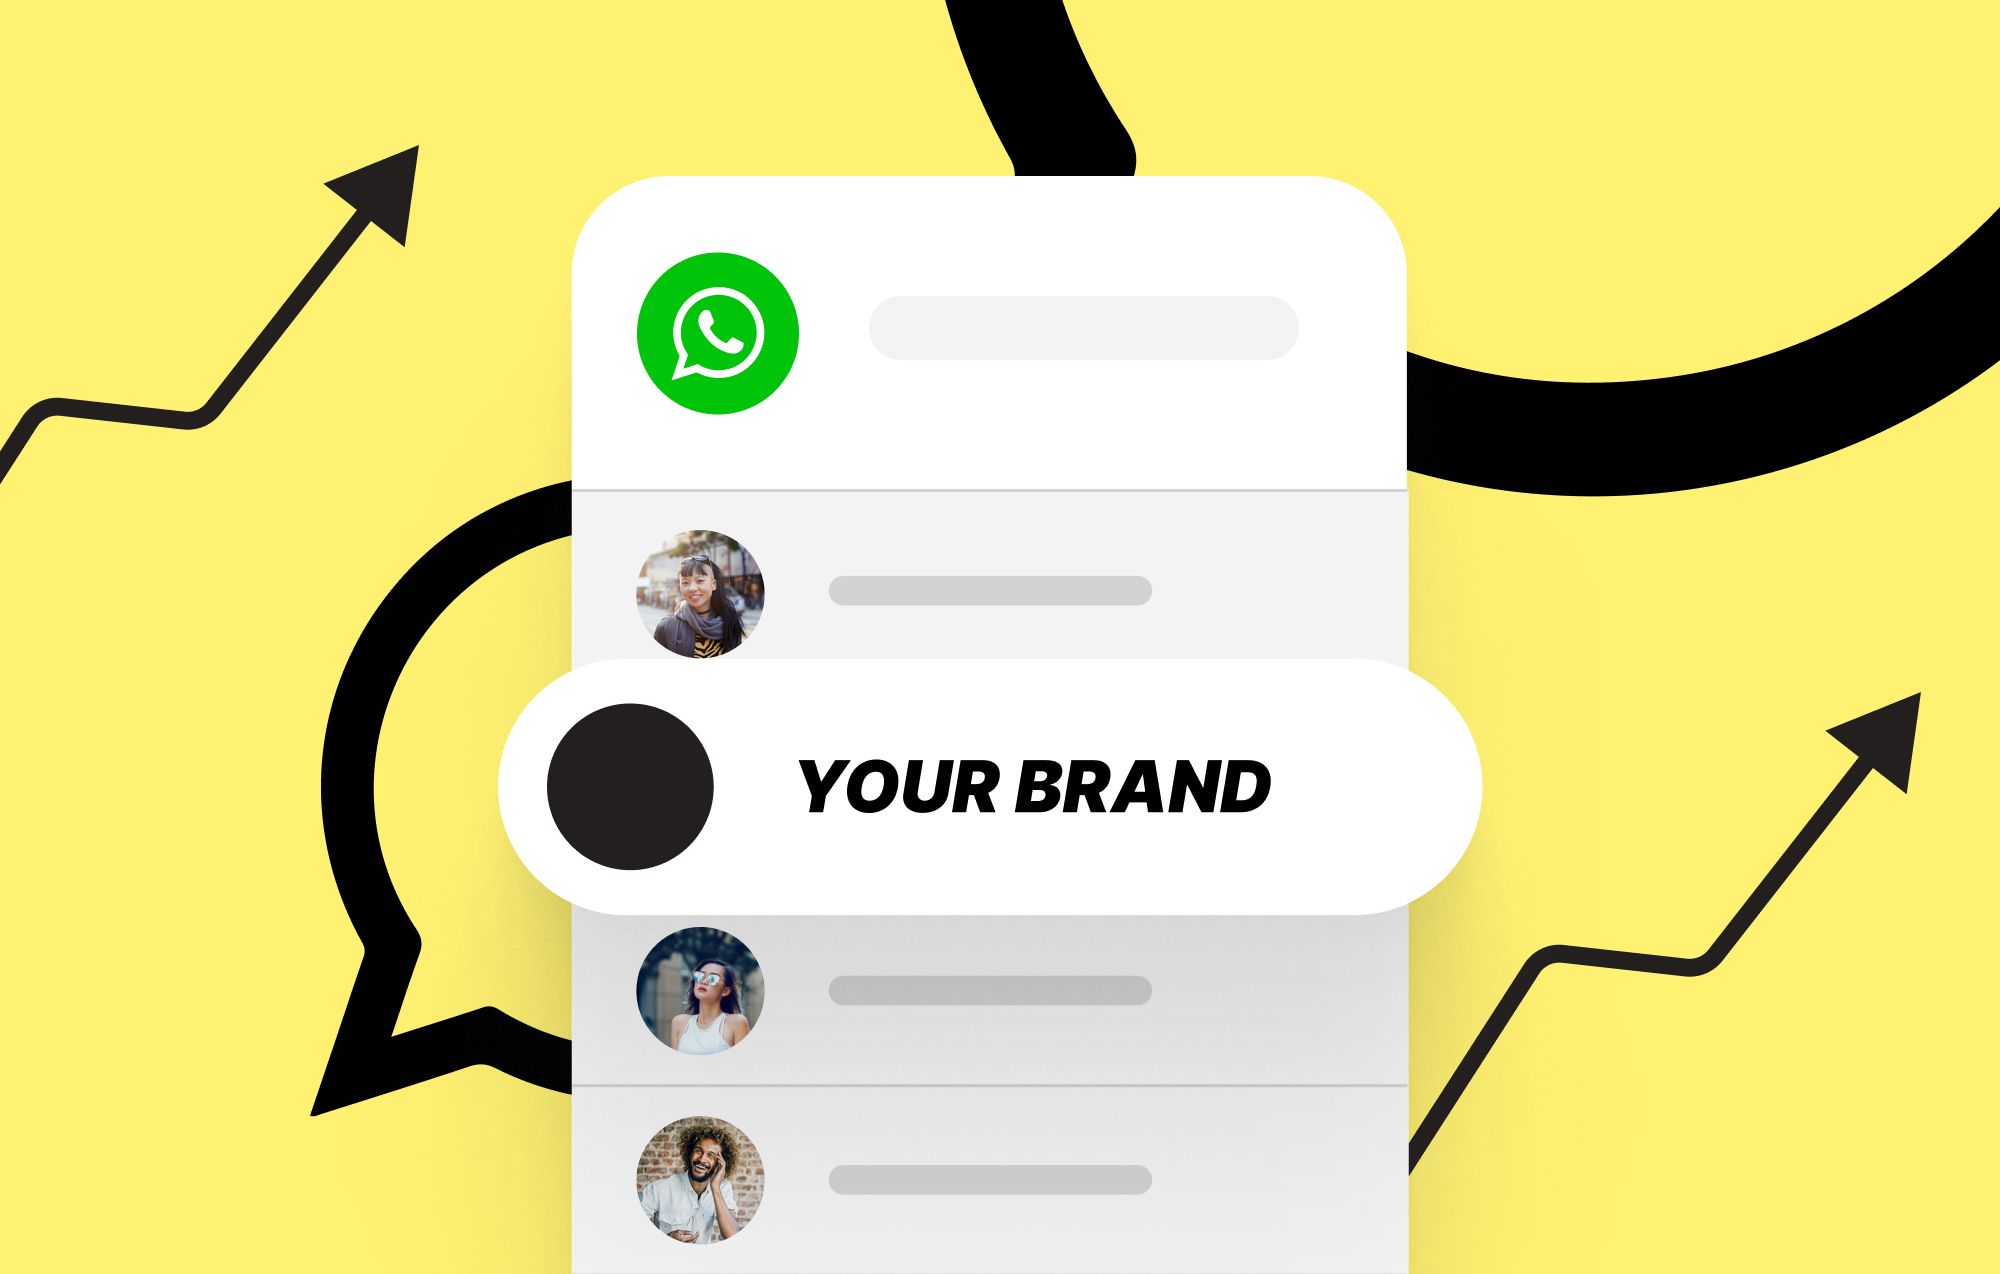 WhatsApp Newsletters: What Are They? Why Should You Send Them in 2022?